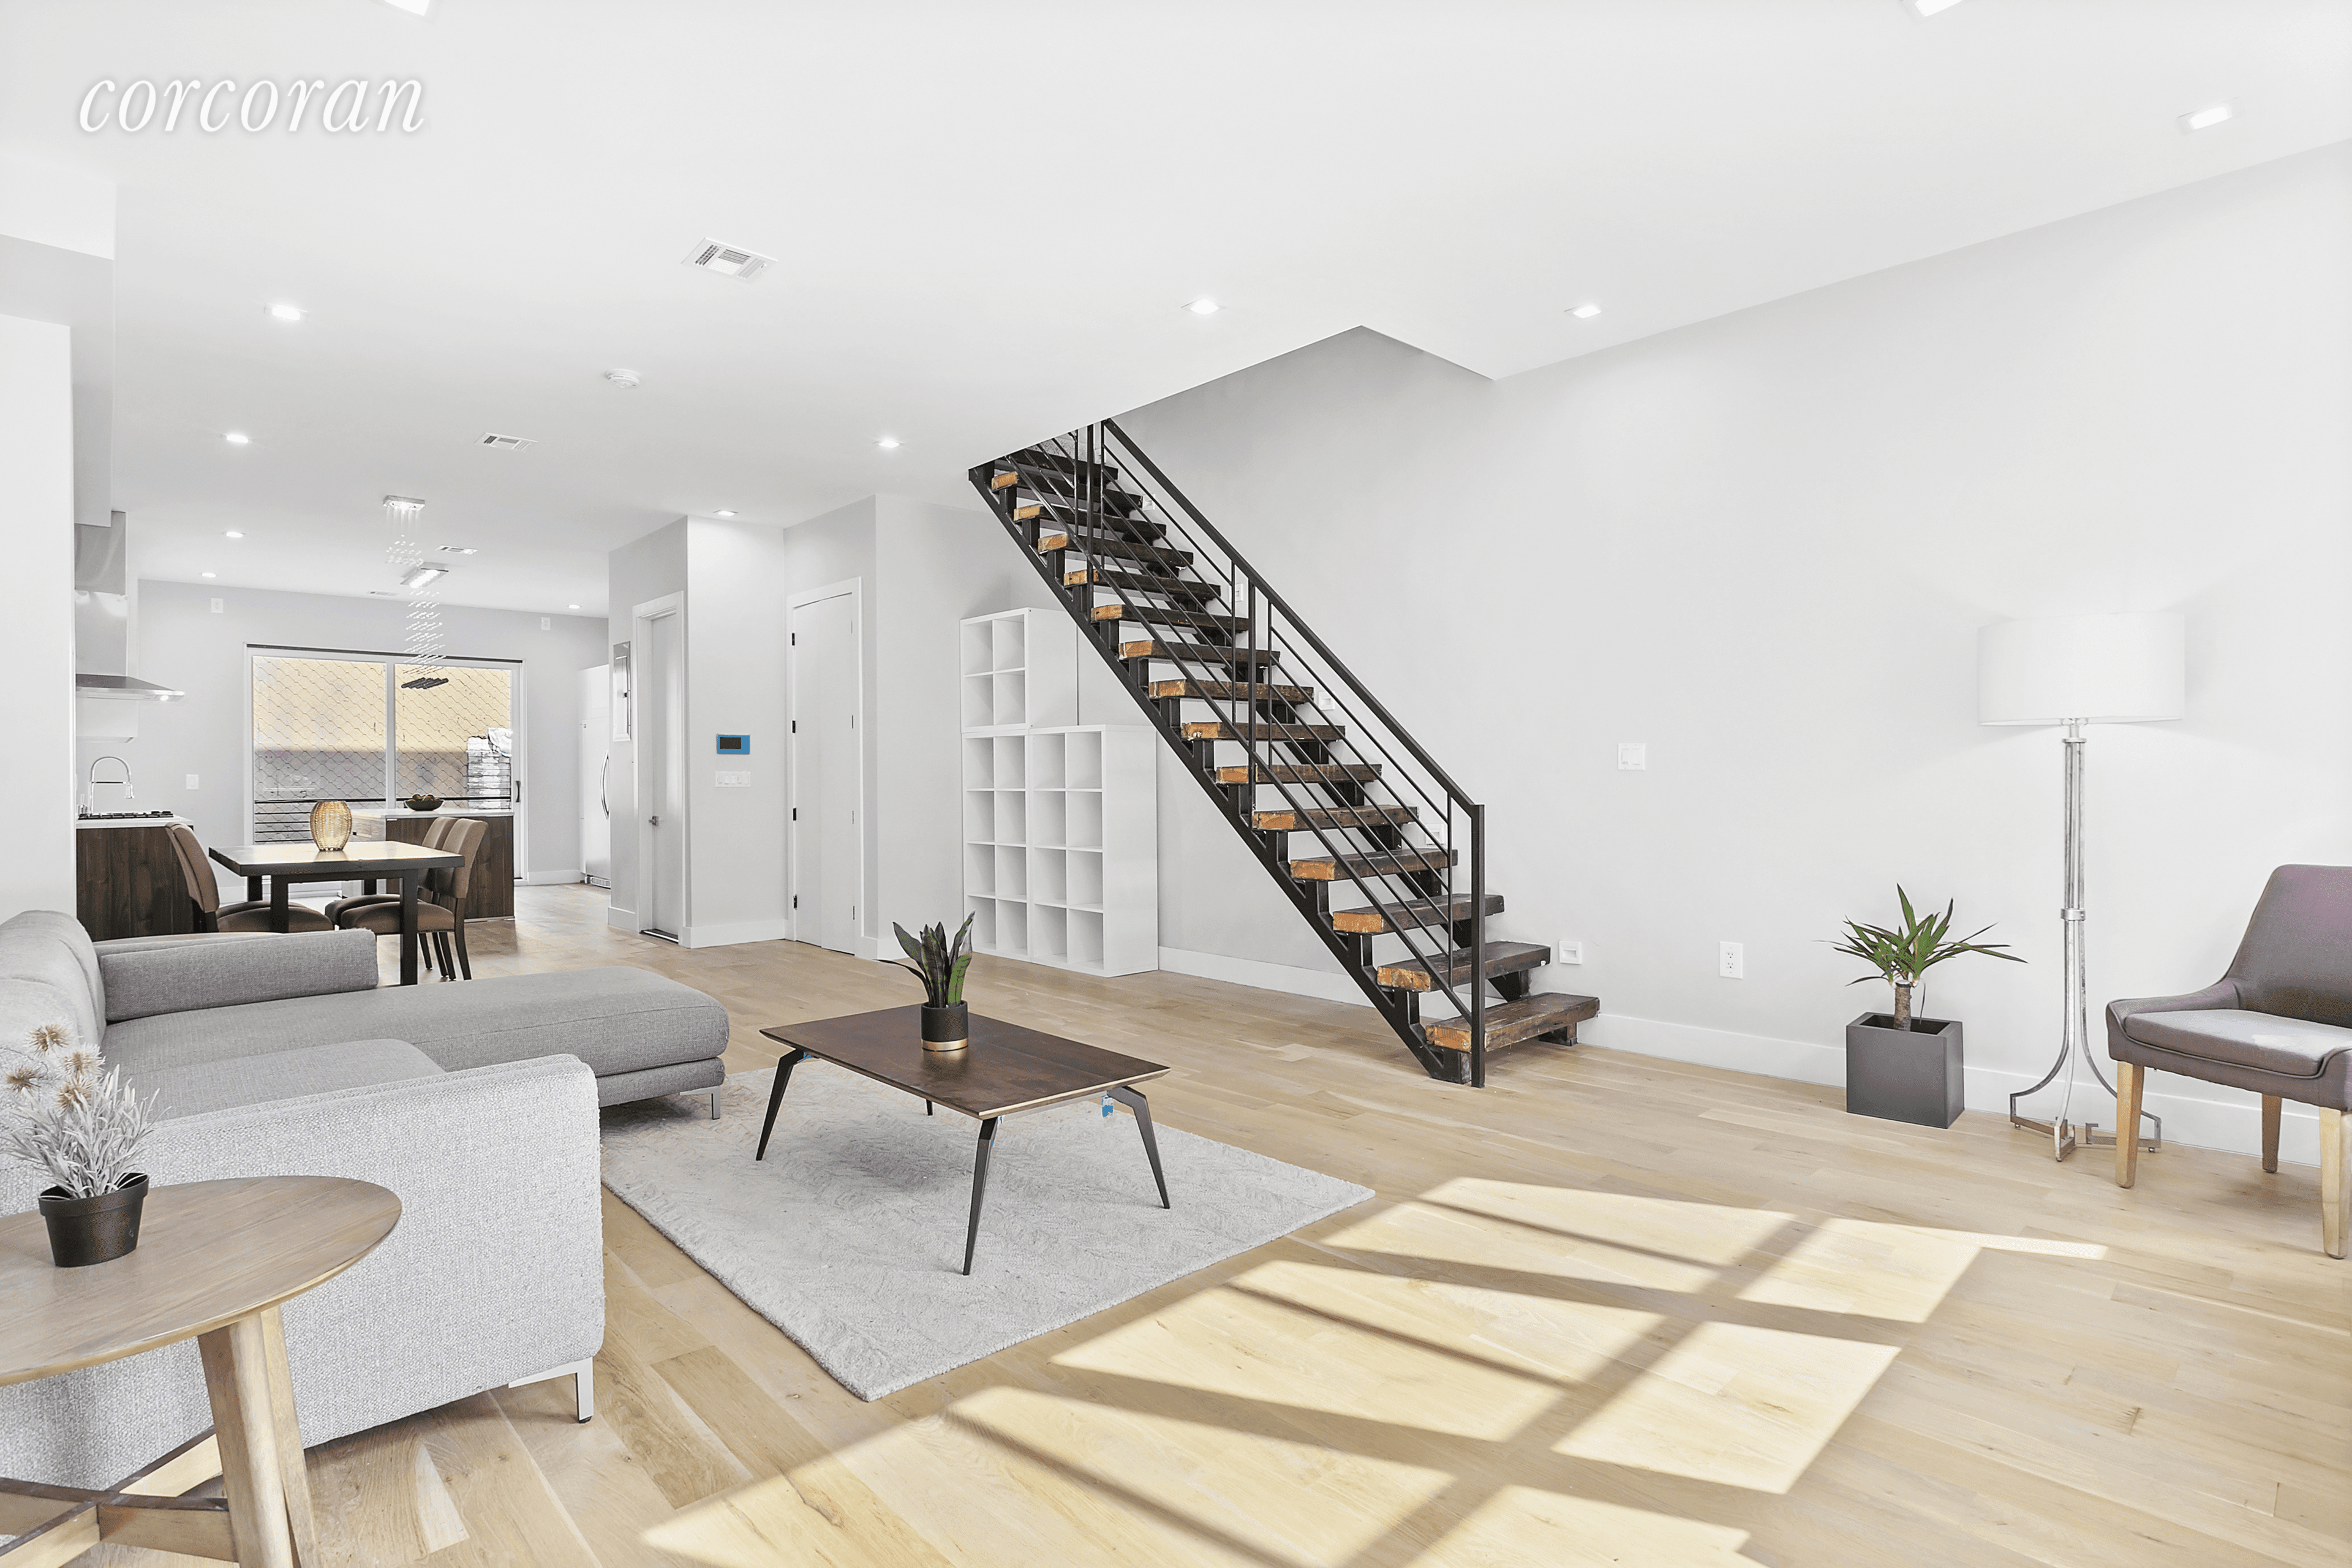 Welcome to 97A Cooper, a beautiful, avant garde two family townhouse in a prime Bushwick location !